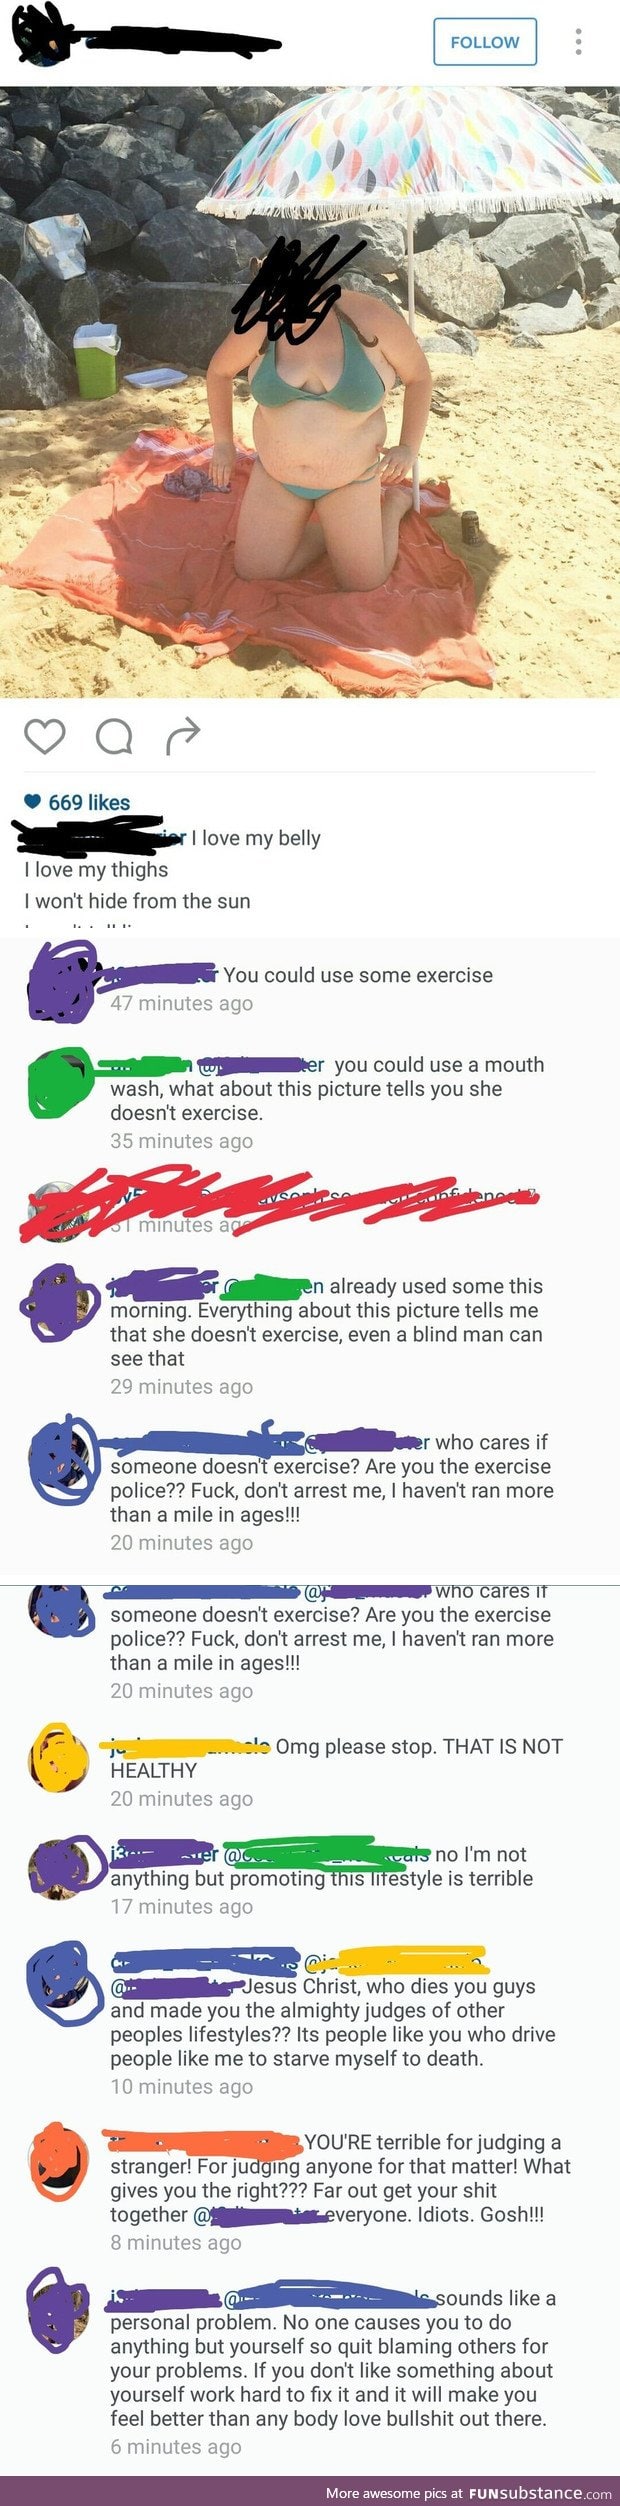 Saying 'you should exercise' is now a huge crime